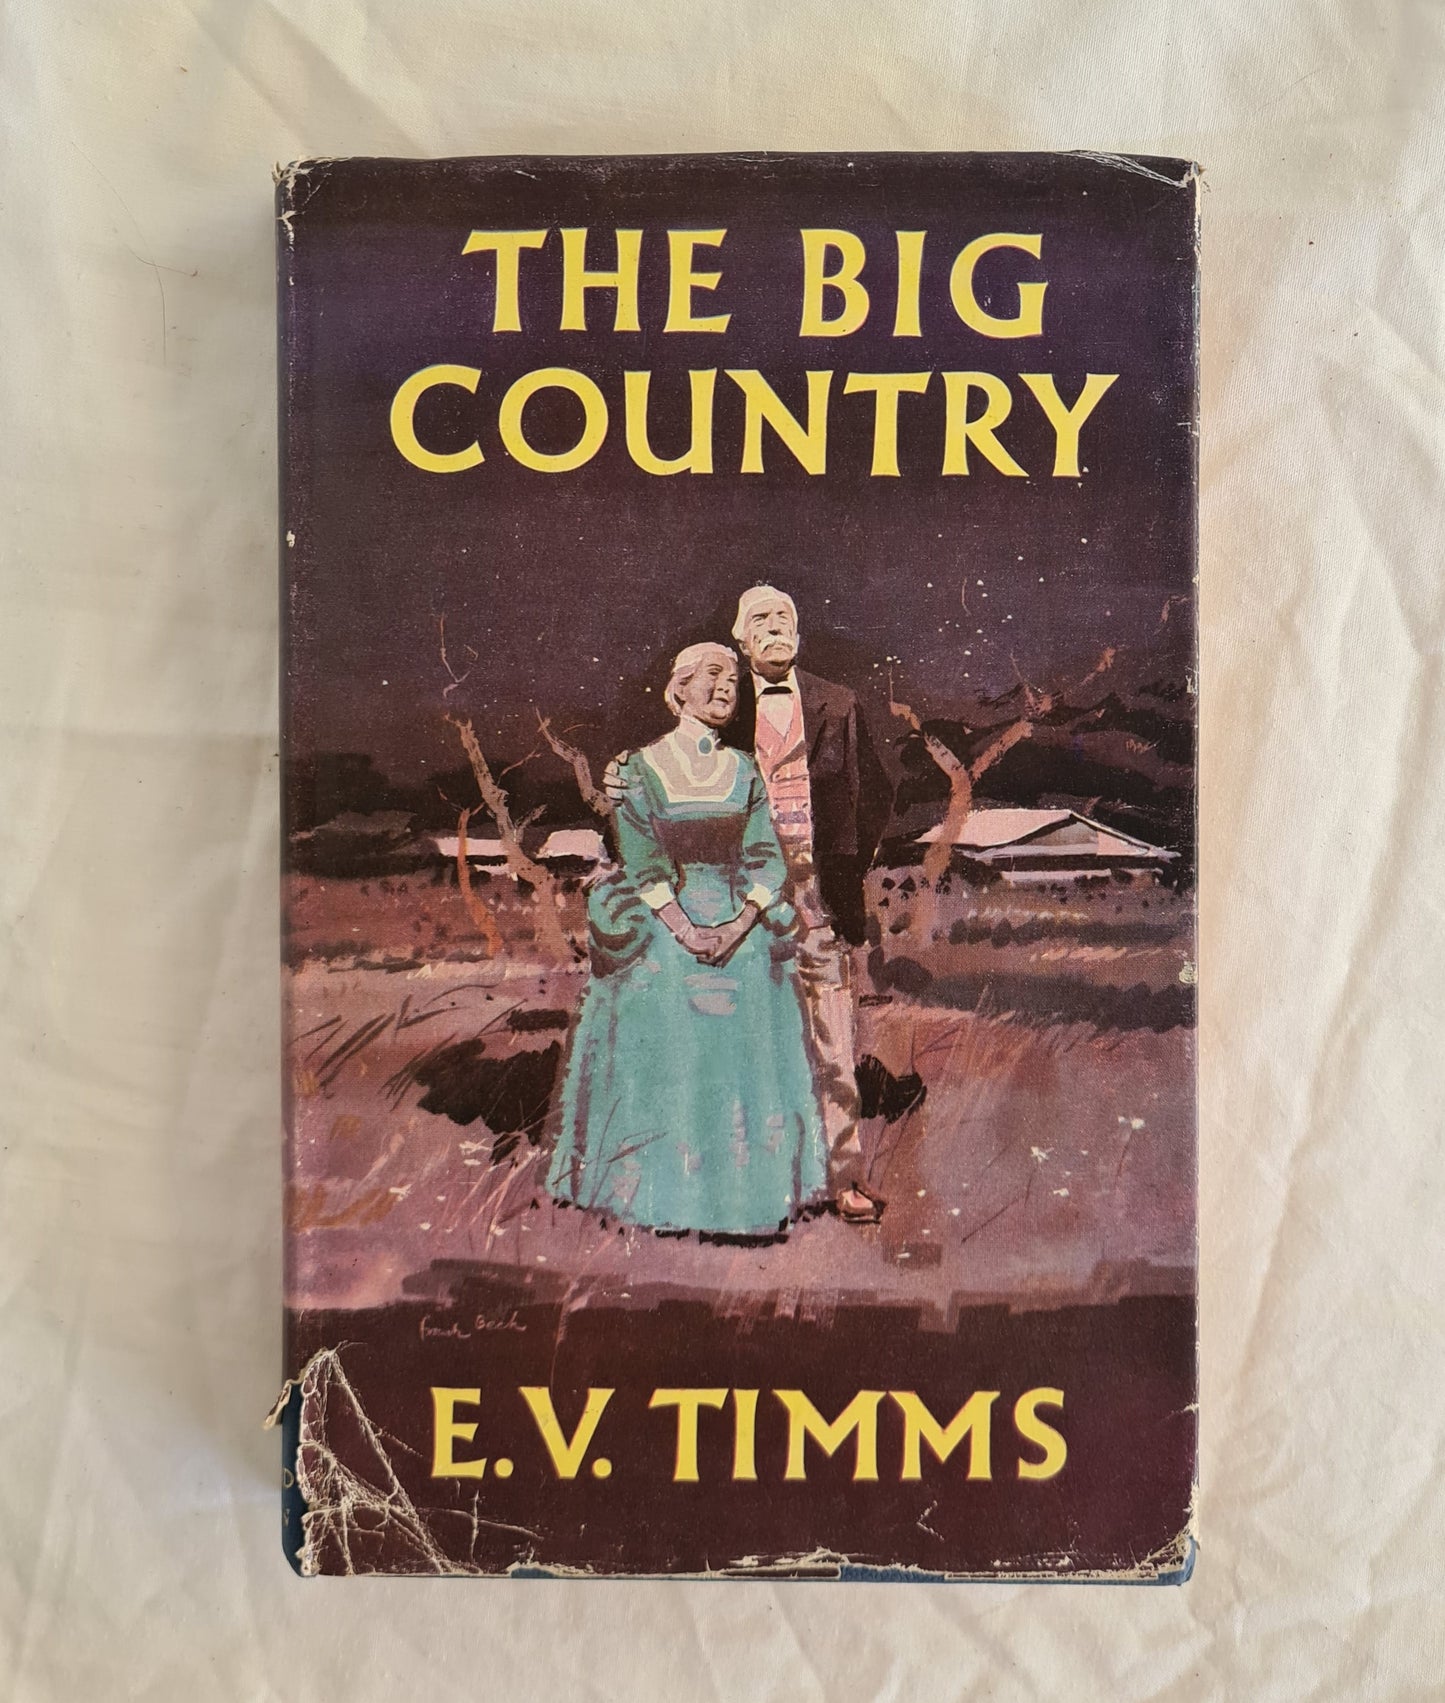 The Big Country by E. V. Timms (DJ)